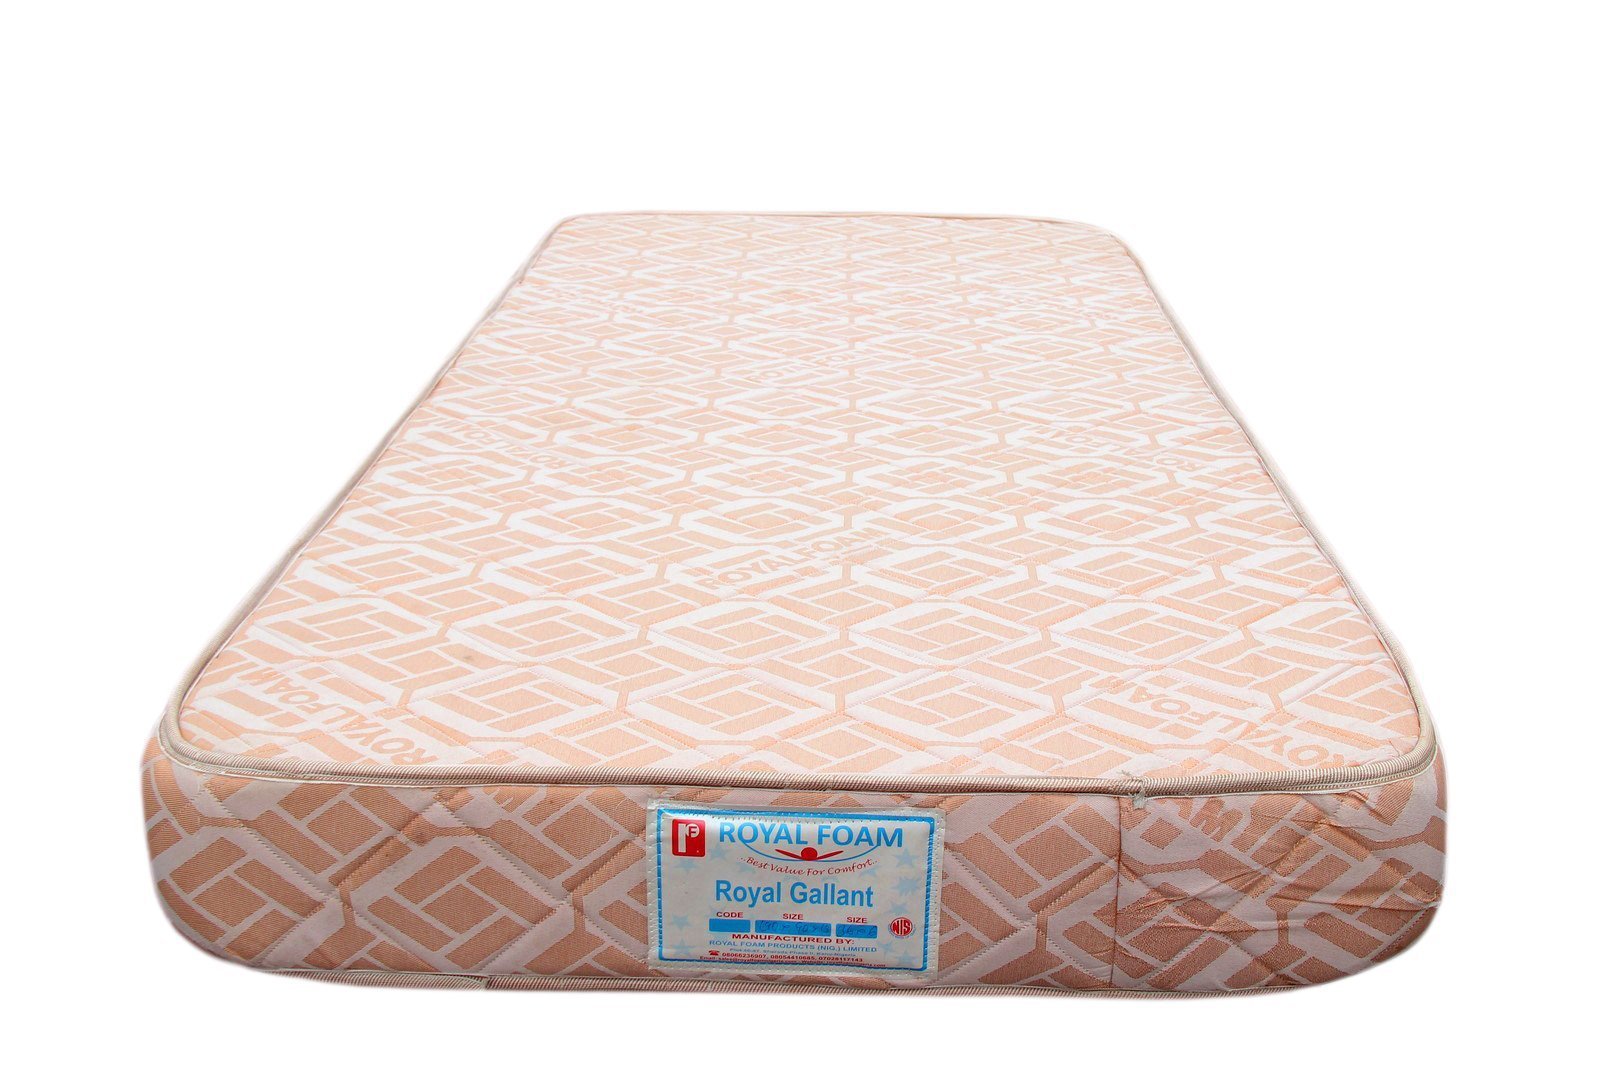 Royal Gallant JACQUARD fabric-Fully Quilted Mattress 190 X 90 X 20 CM(6ft x 3ft x 8inches) Single(Lagos Only)